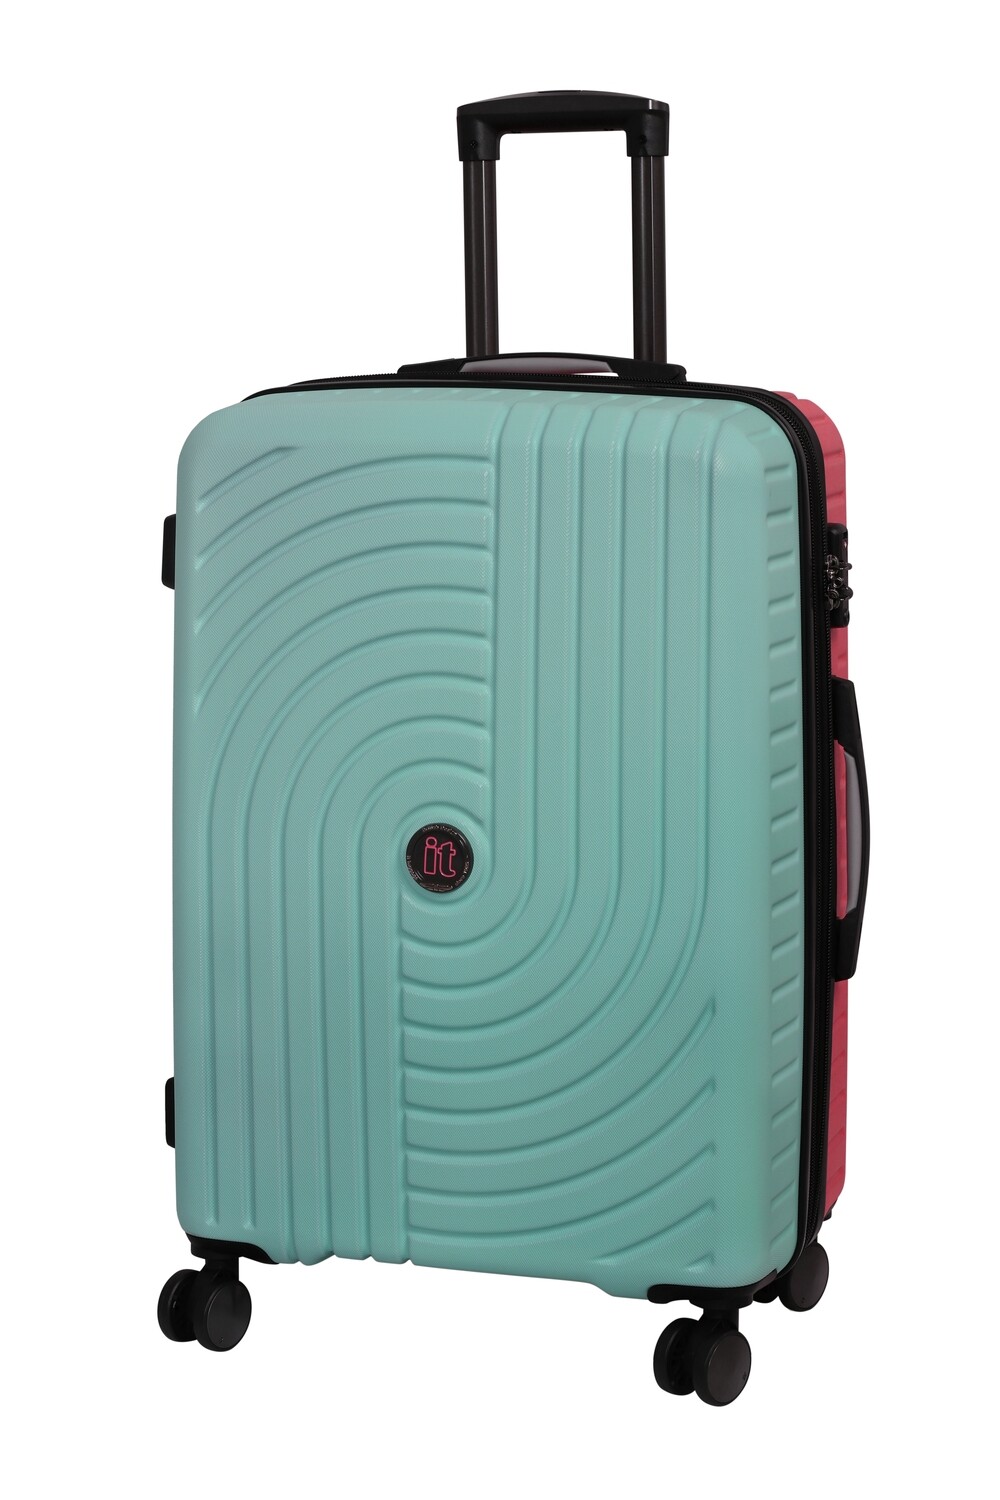 IT LUGGAGE DUO-MIX 25" TROLLEY BEACHGLASS/FUSIONCORAL